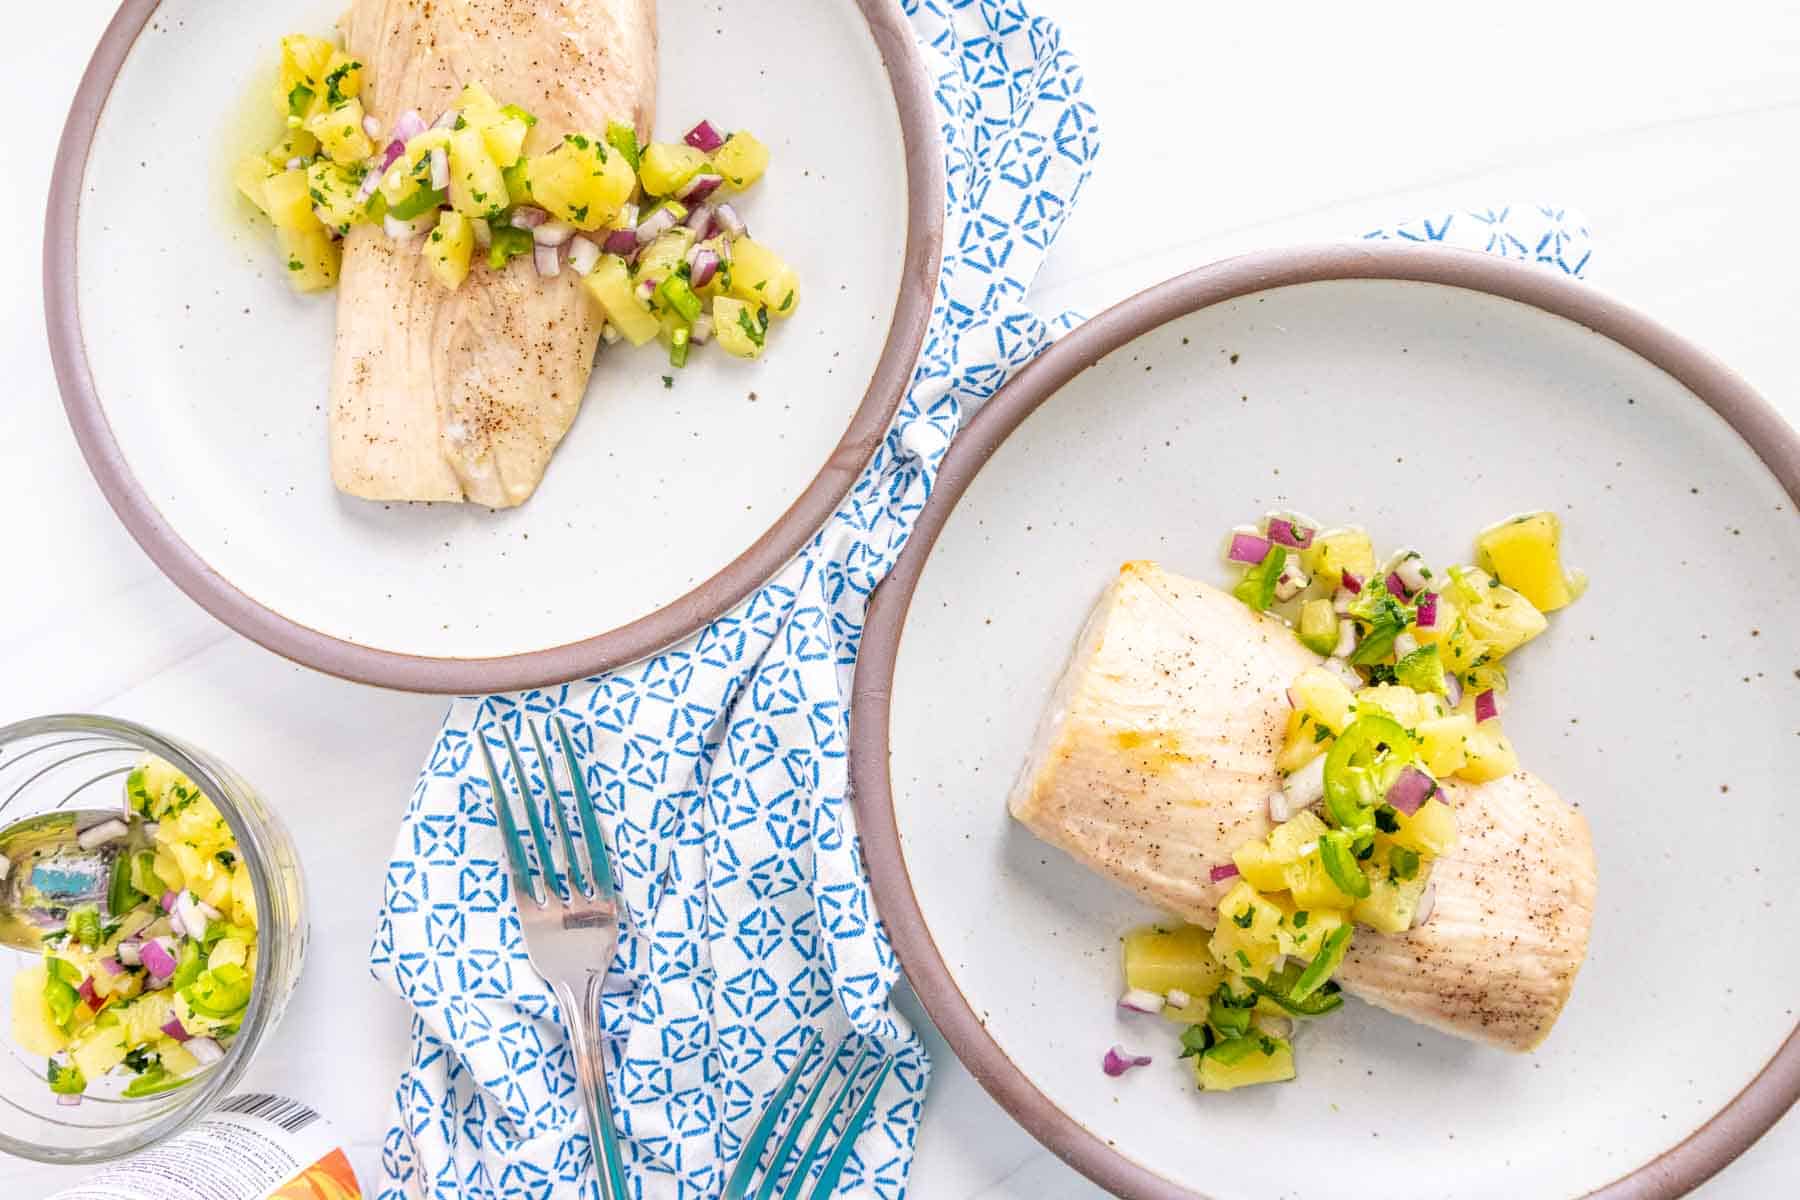 Two plates with fish fillets topped with pineapple and red onion salsa, set on a white table with a patterned napkin between them.